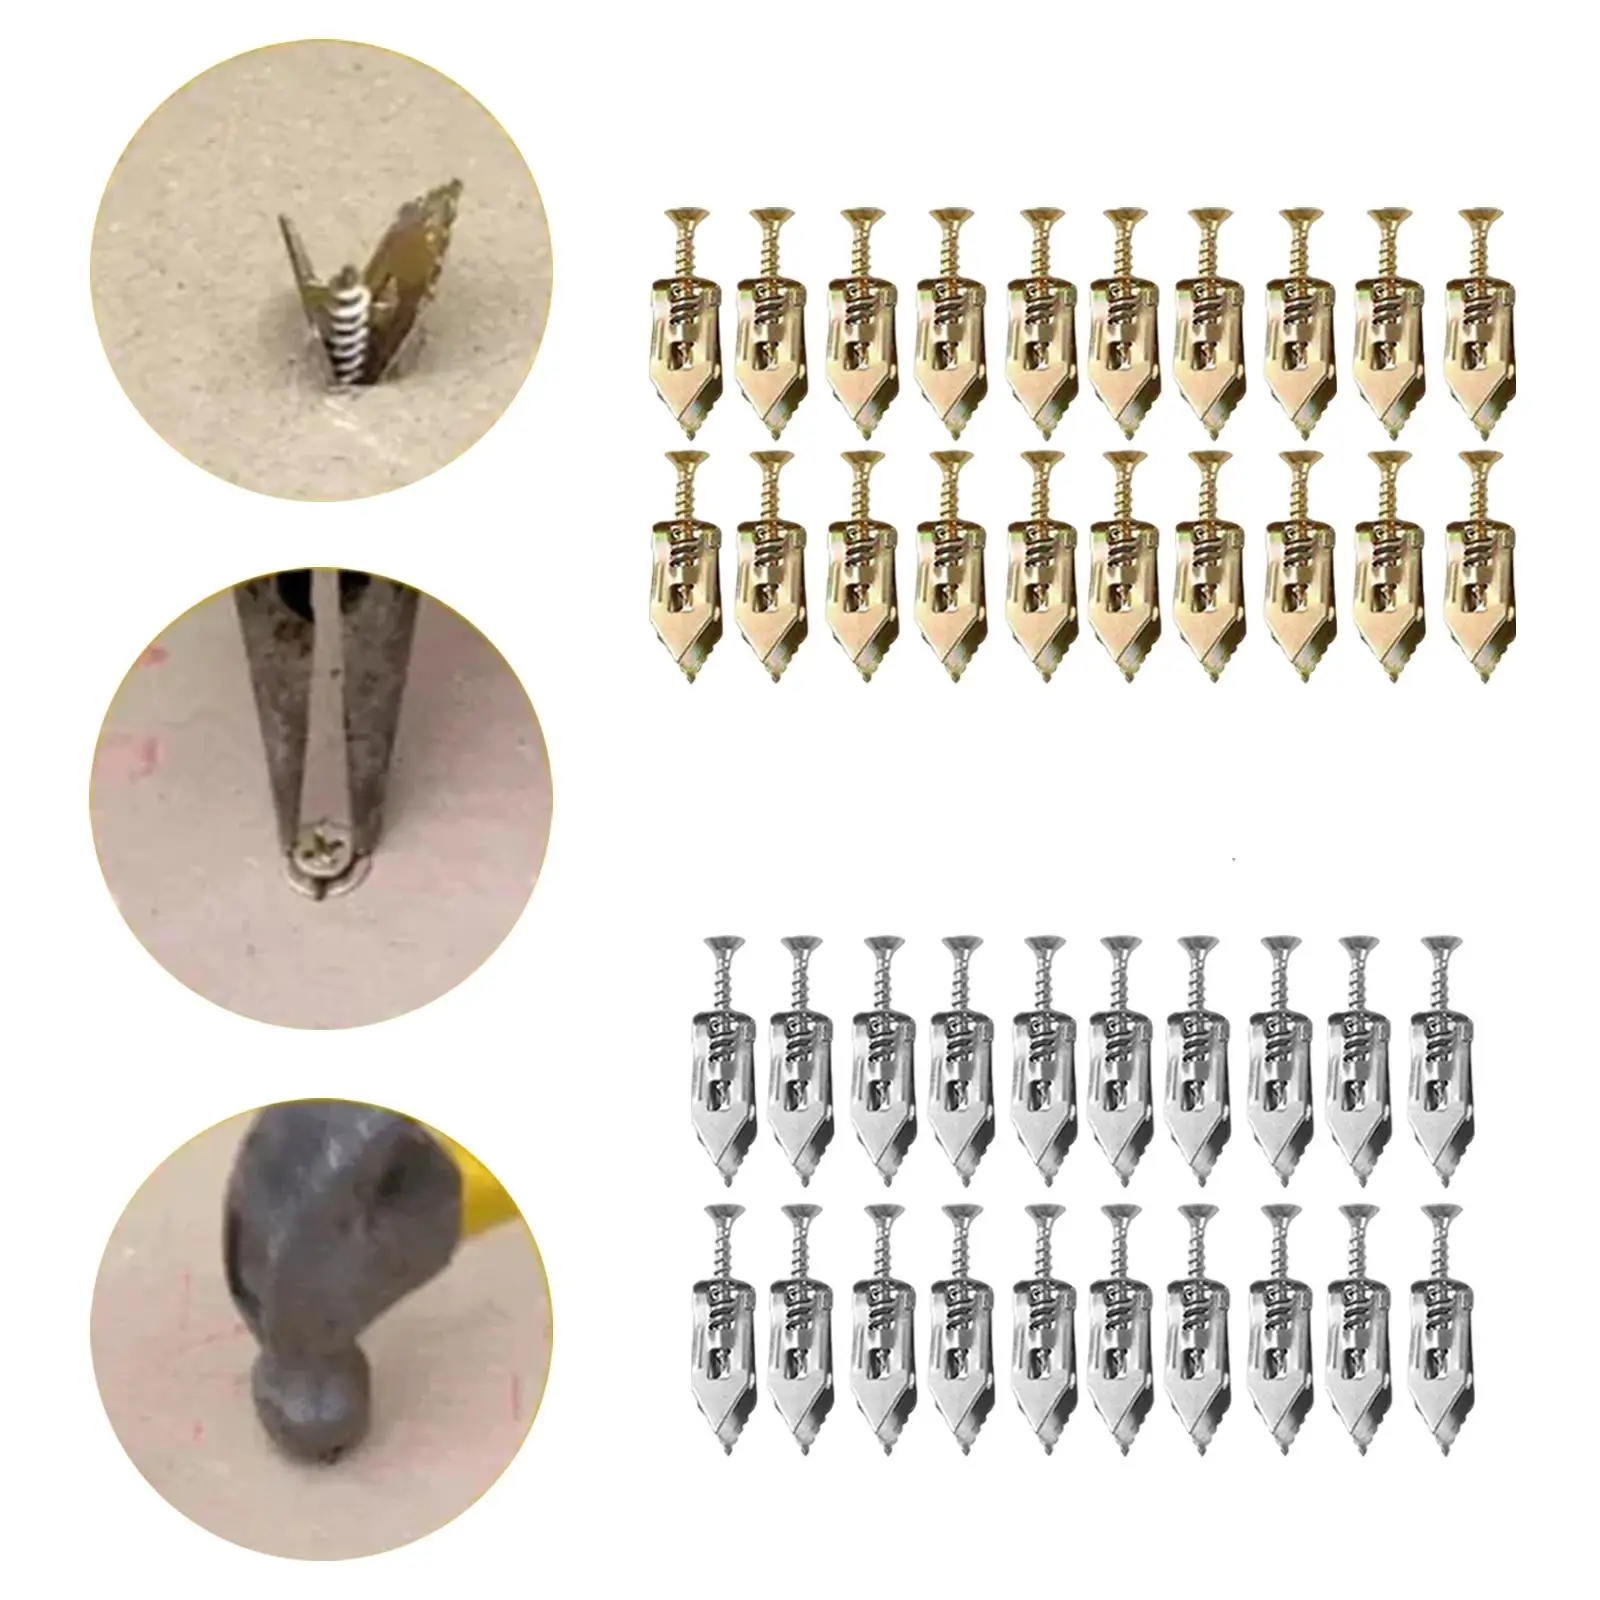 20x Drywall Self drill Anchors with Screws No Drill Holes in Wall Expansion Screw Set for Fixing picture Cabinets